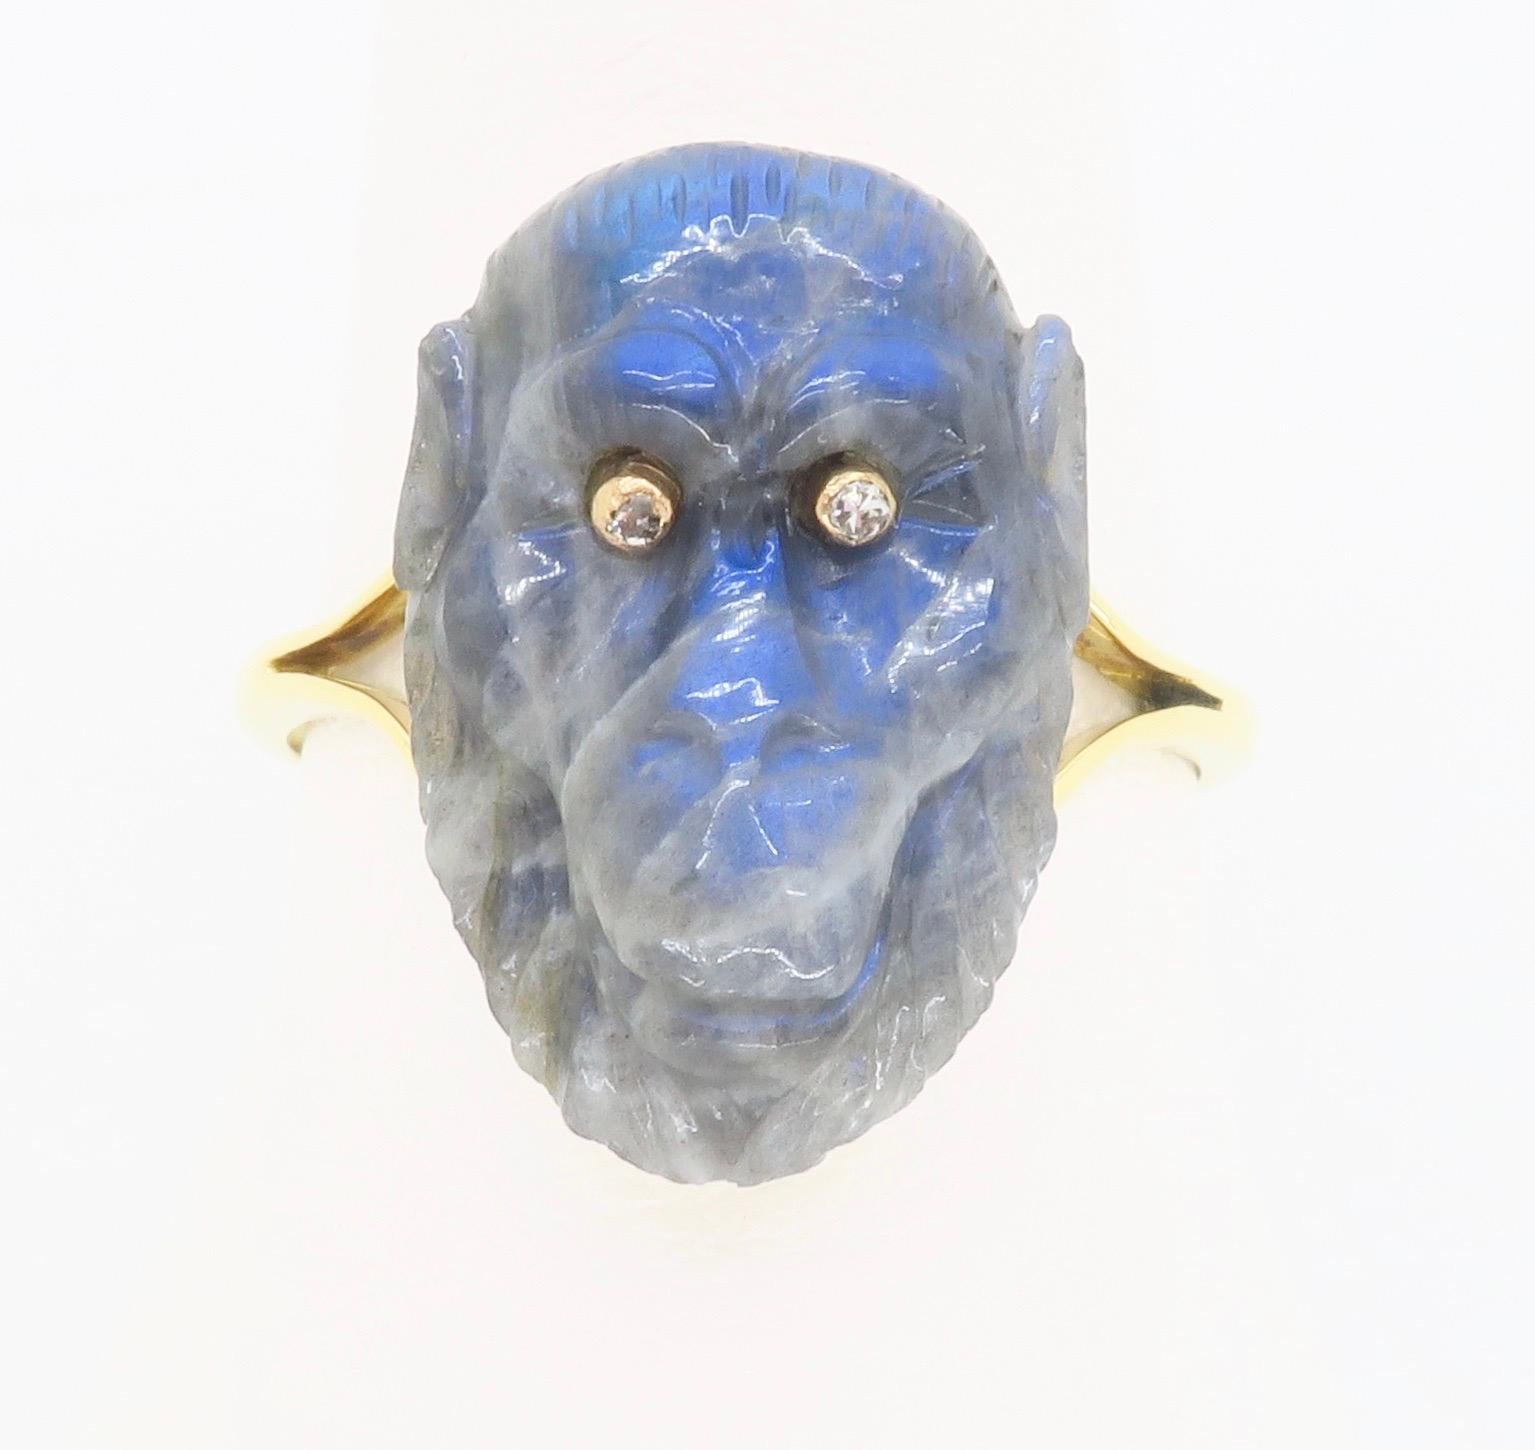 18k Yellow Gold Ring with Carved Labradorite Gorilla with Diamond Eyes 4